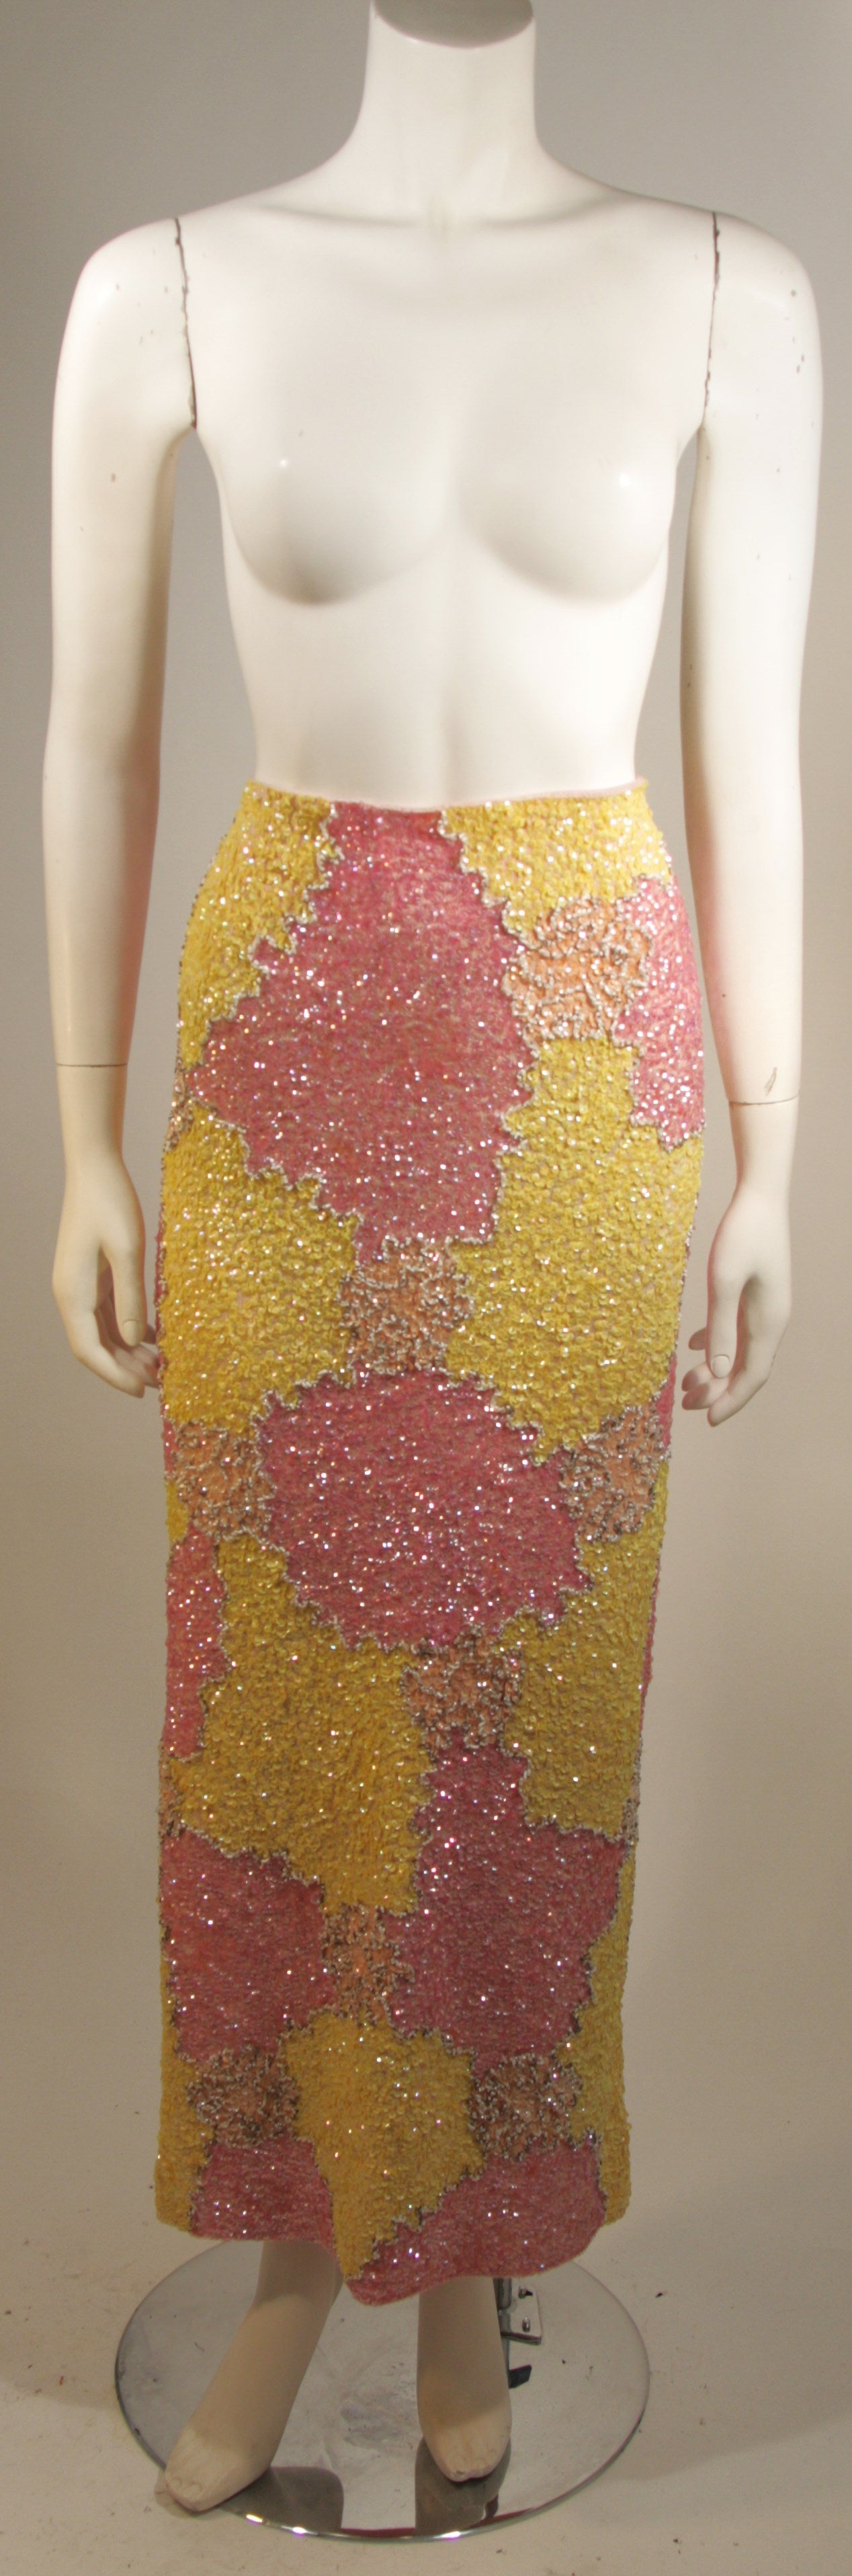 Gene Shelly's Yellow and Pink Stretch Wool Abstract Sequin Motif Evening Set 6-8 For Sale 3